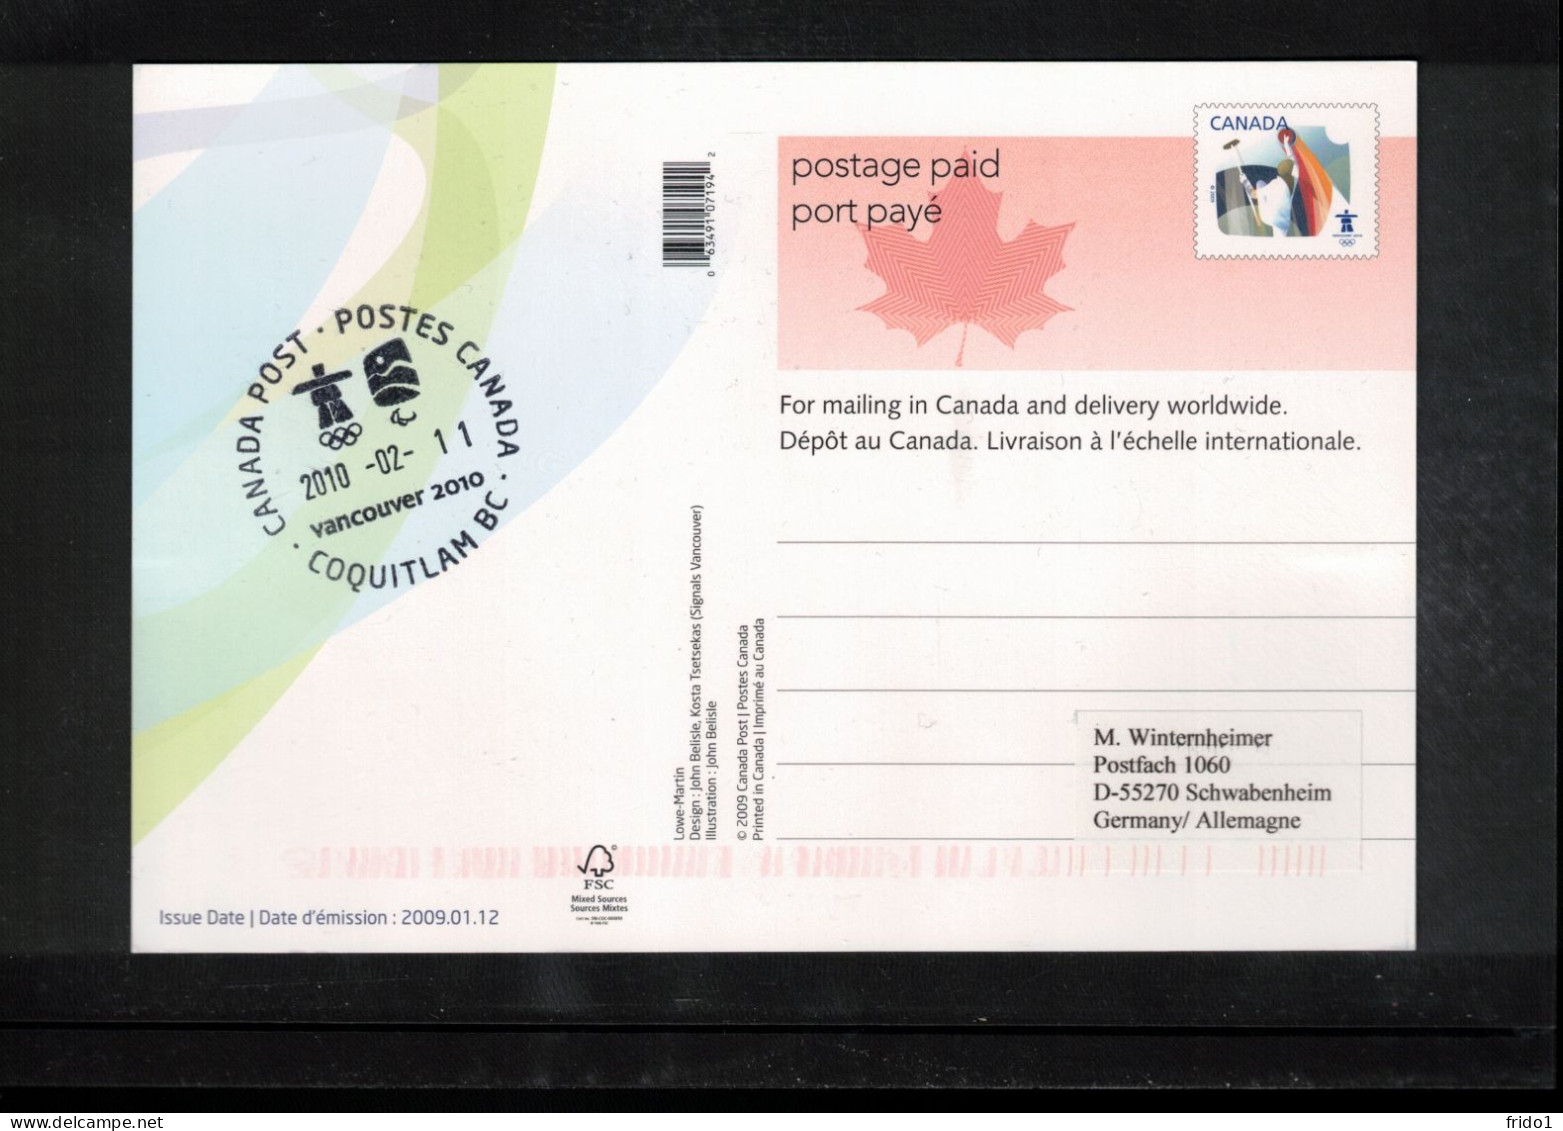 Canada 2010 Olympic Games Vancouver - COQUITLAM BC Postmark Interesting Postcard - Hiver 2010: Vancouver